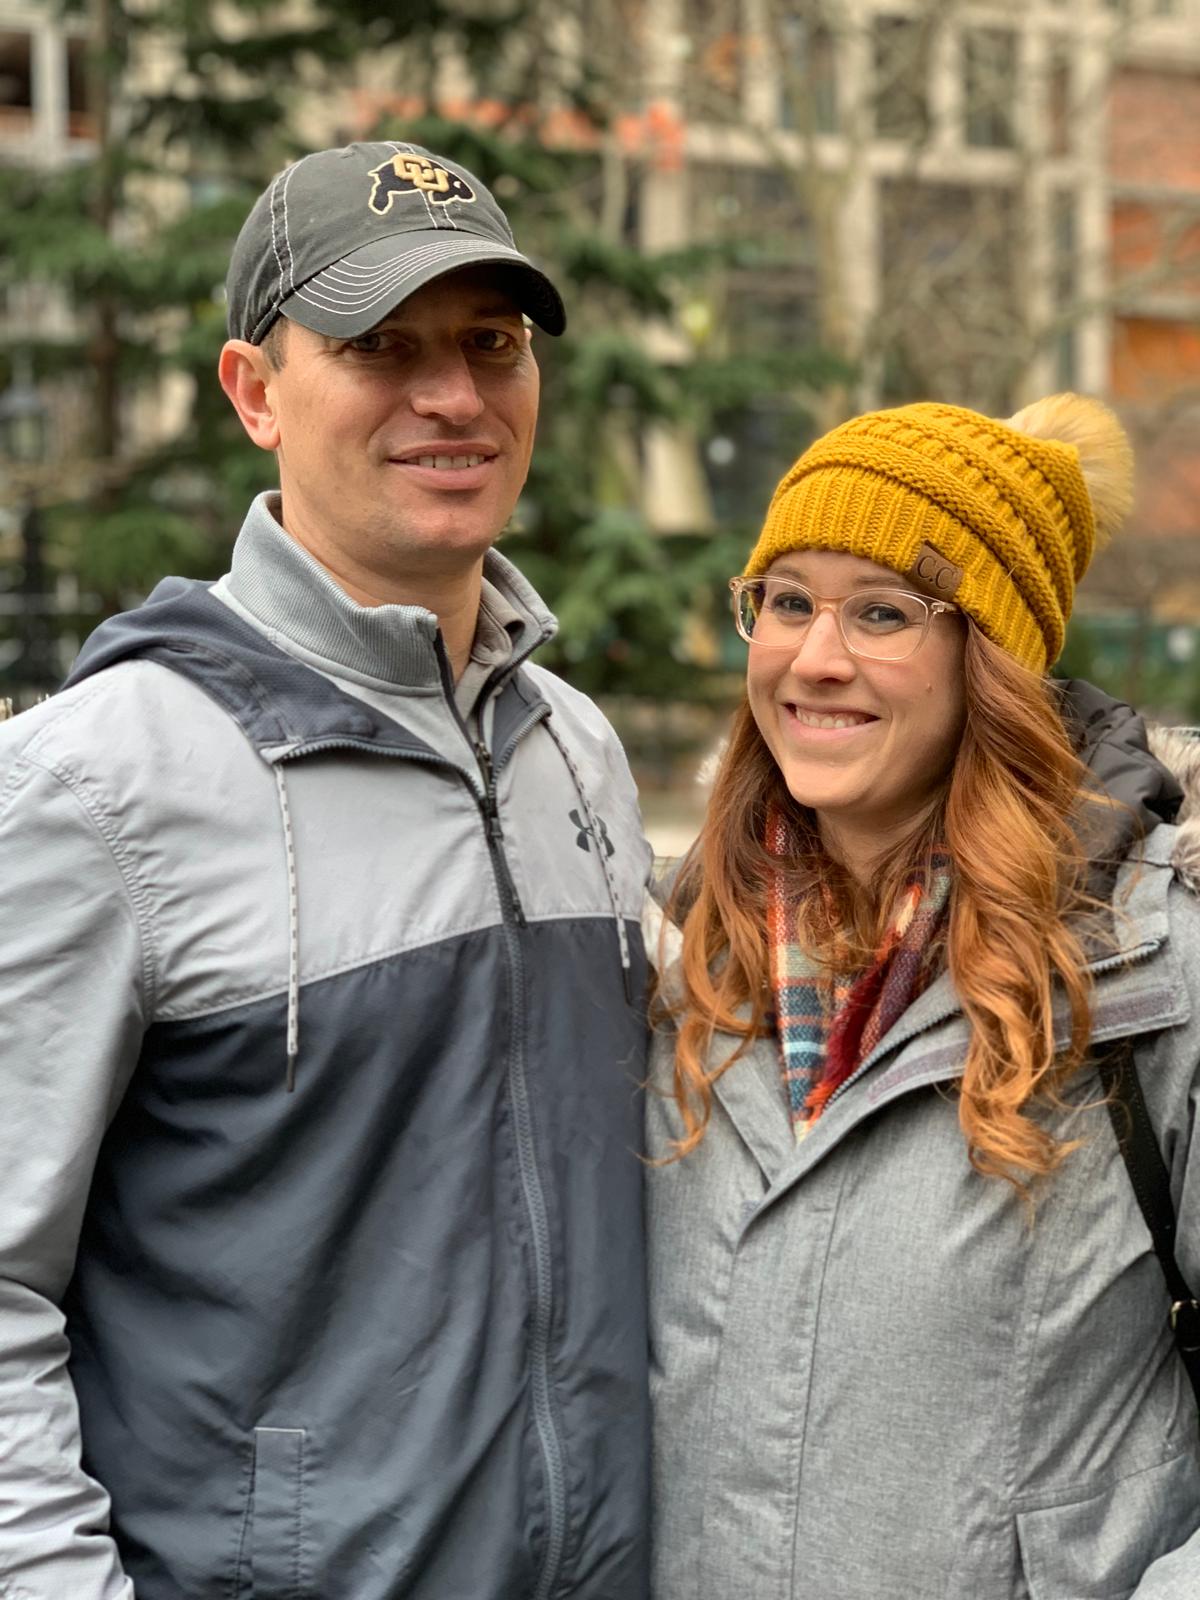 Jason and Heather in New York on Feb. 15, 2019. (Stuart Liess/The Epoch Times)